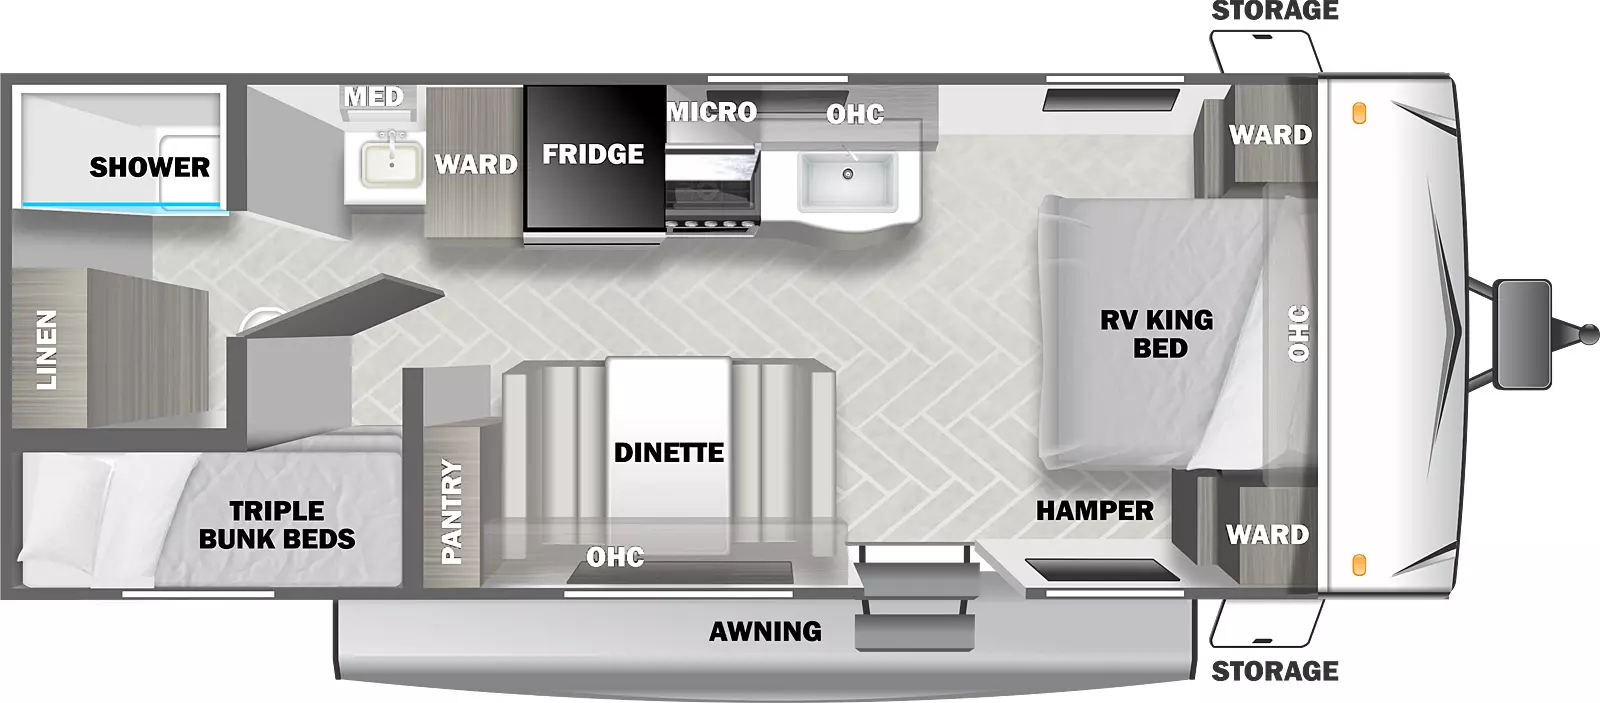 The T2250 has zero slide outs and one entry. Exterior features front storage, and an awning. Interior layout front to back: RV king bed with overhead cabinet, wardrobes on each side, and hamper on door side; off-door side kitchen counter with sink, overhead cabinet, microwave, cooktop, refrigerator, wardrobe, and bathroom sink with medicine cabinet; door side entry, dinette with overhead cabinet, and pantry; rear off-door side bathroom with shower, toilet, and linen closet only; rear door side triple bunk beds.